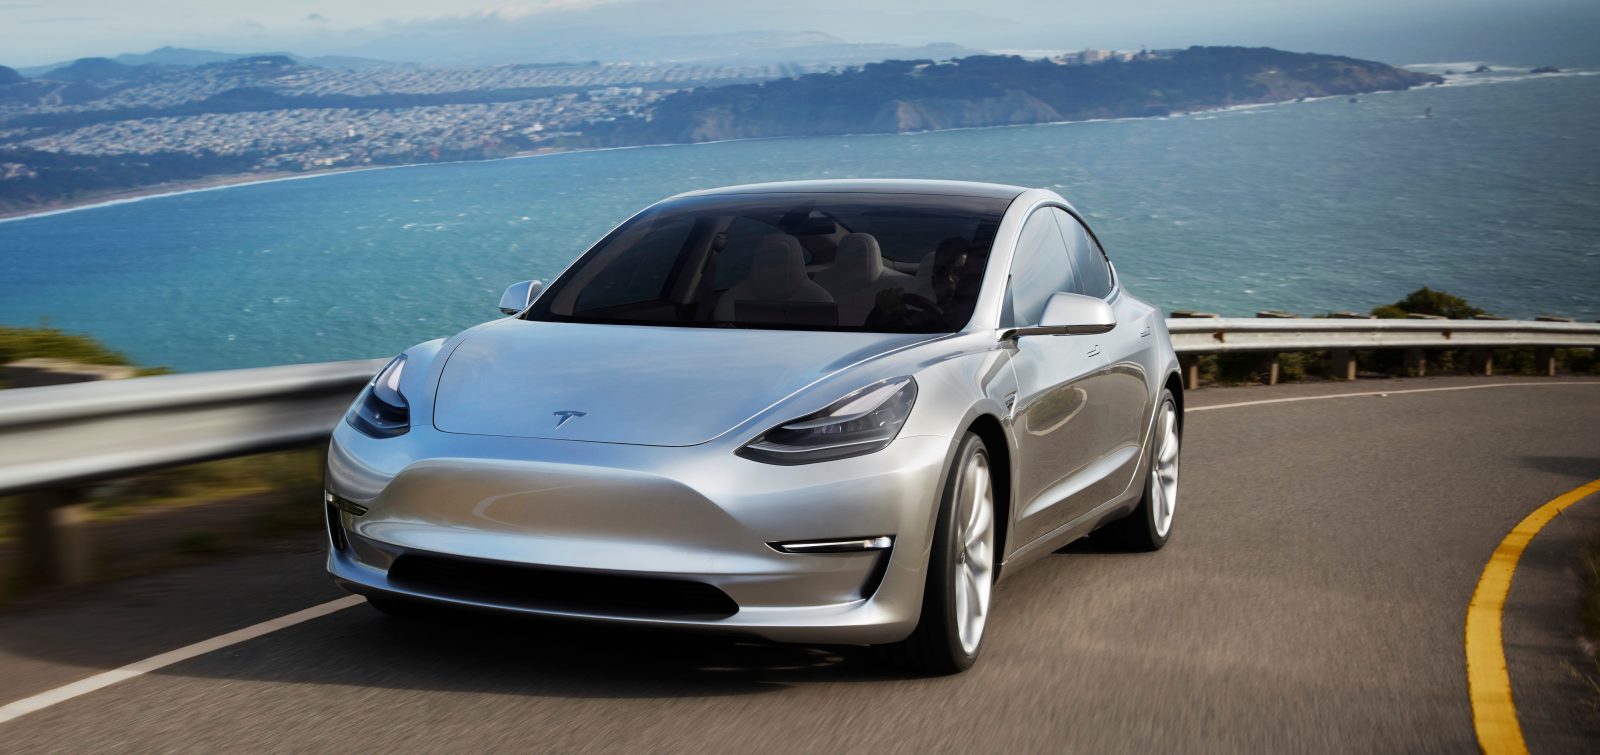 Tesla Shows 3 with 100 Battery Pack - The Next Avenue